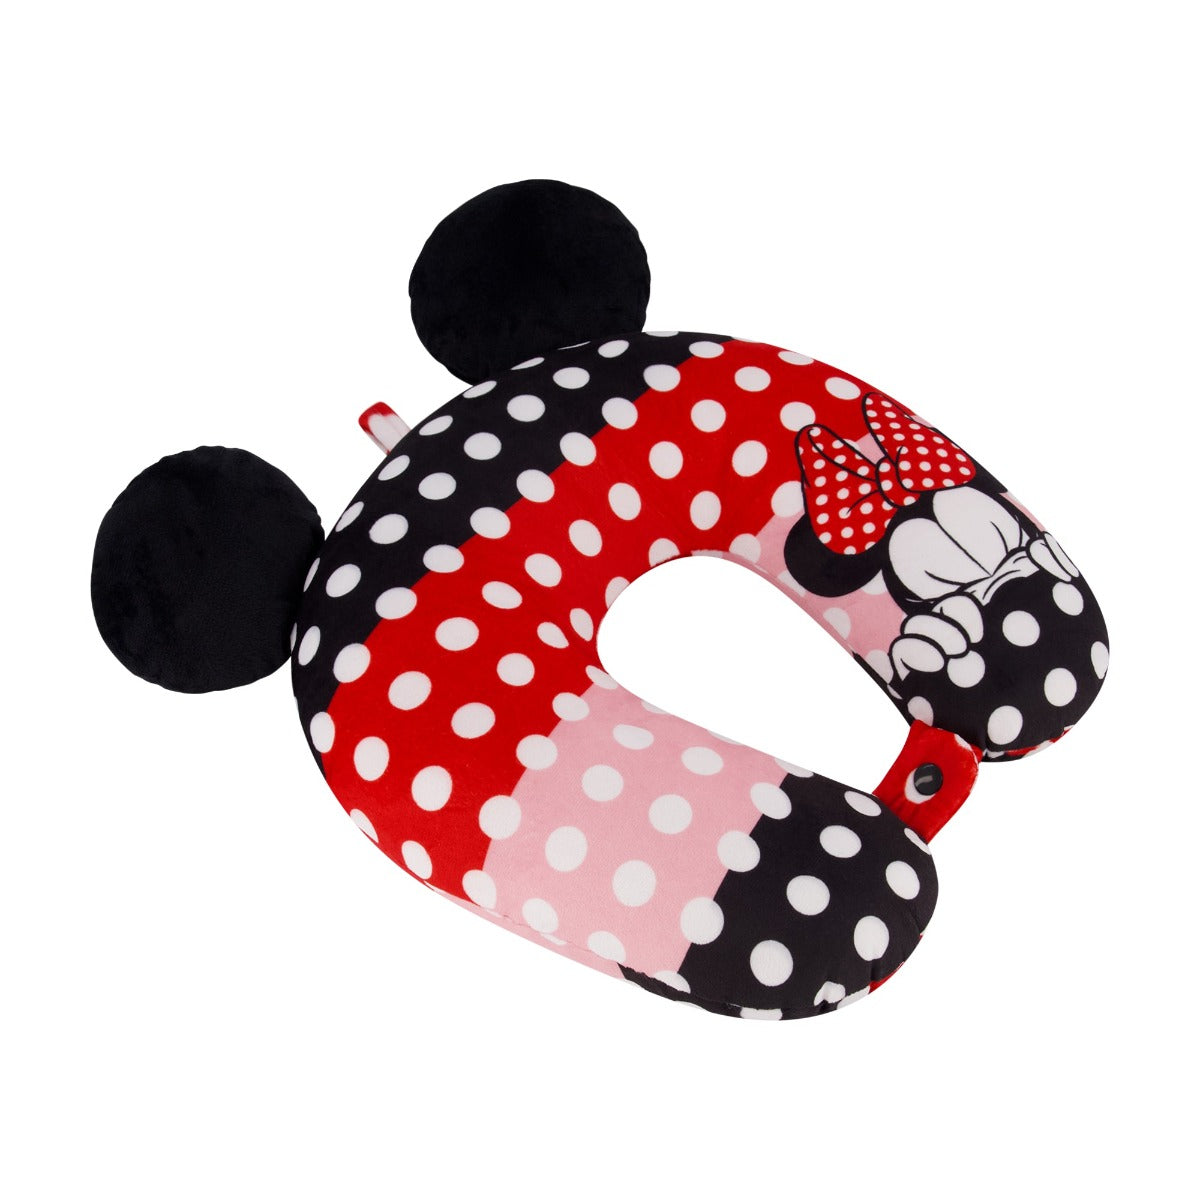 Ful disney minnie mouse three color polka dot ears neck pillow red black pink - traveling wrap neck pillows for kids and adults